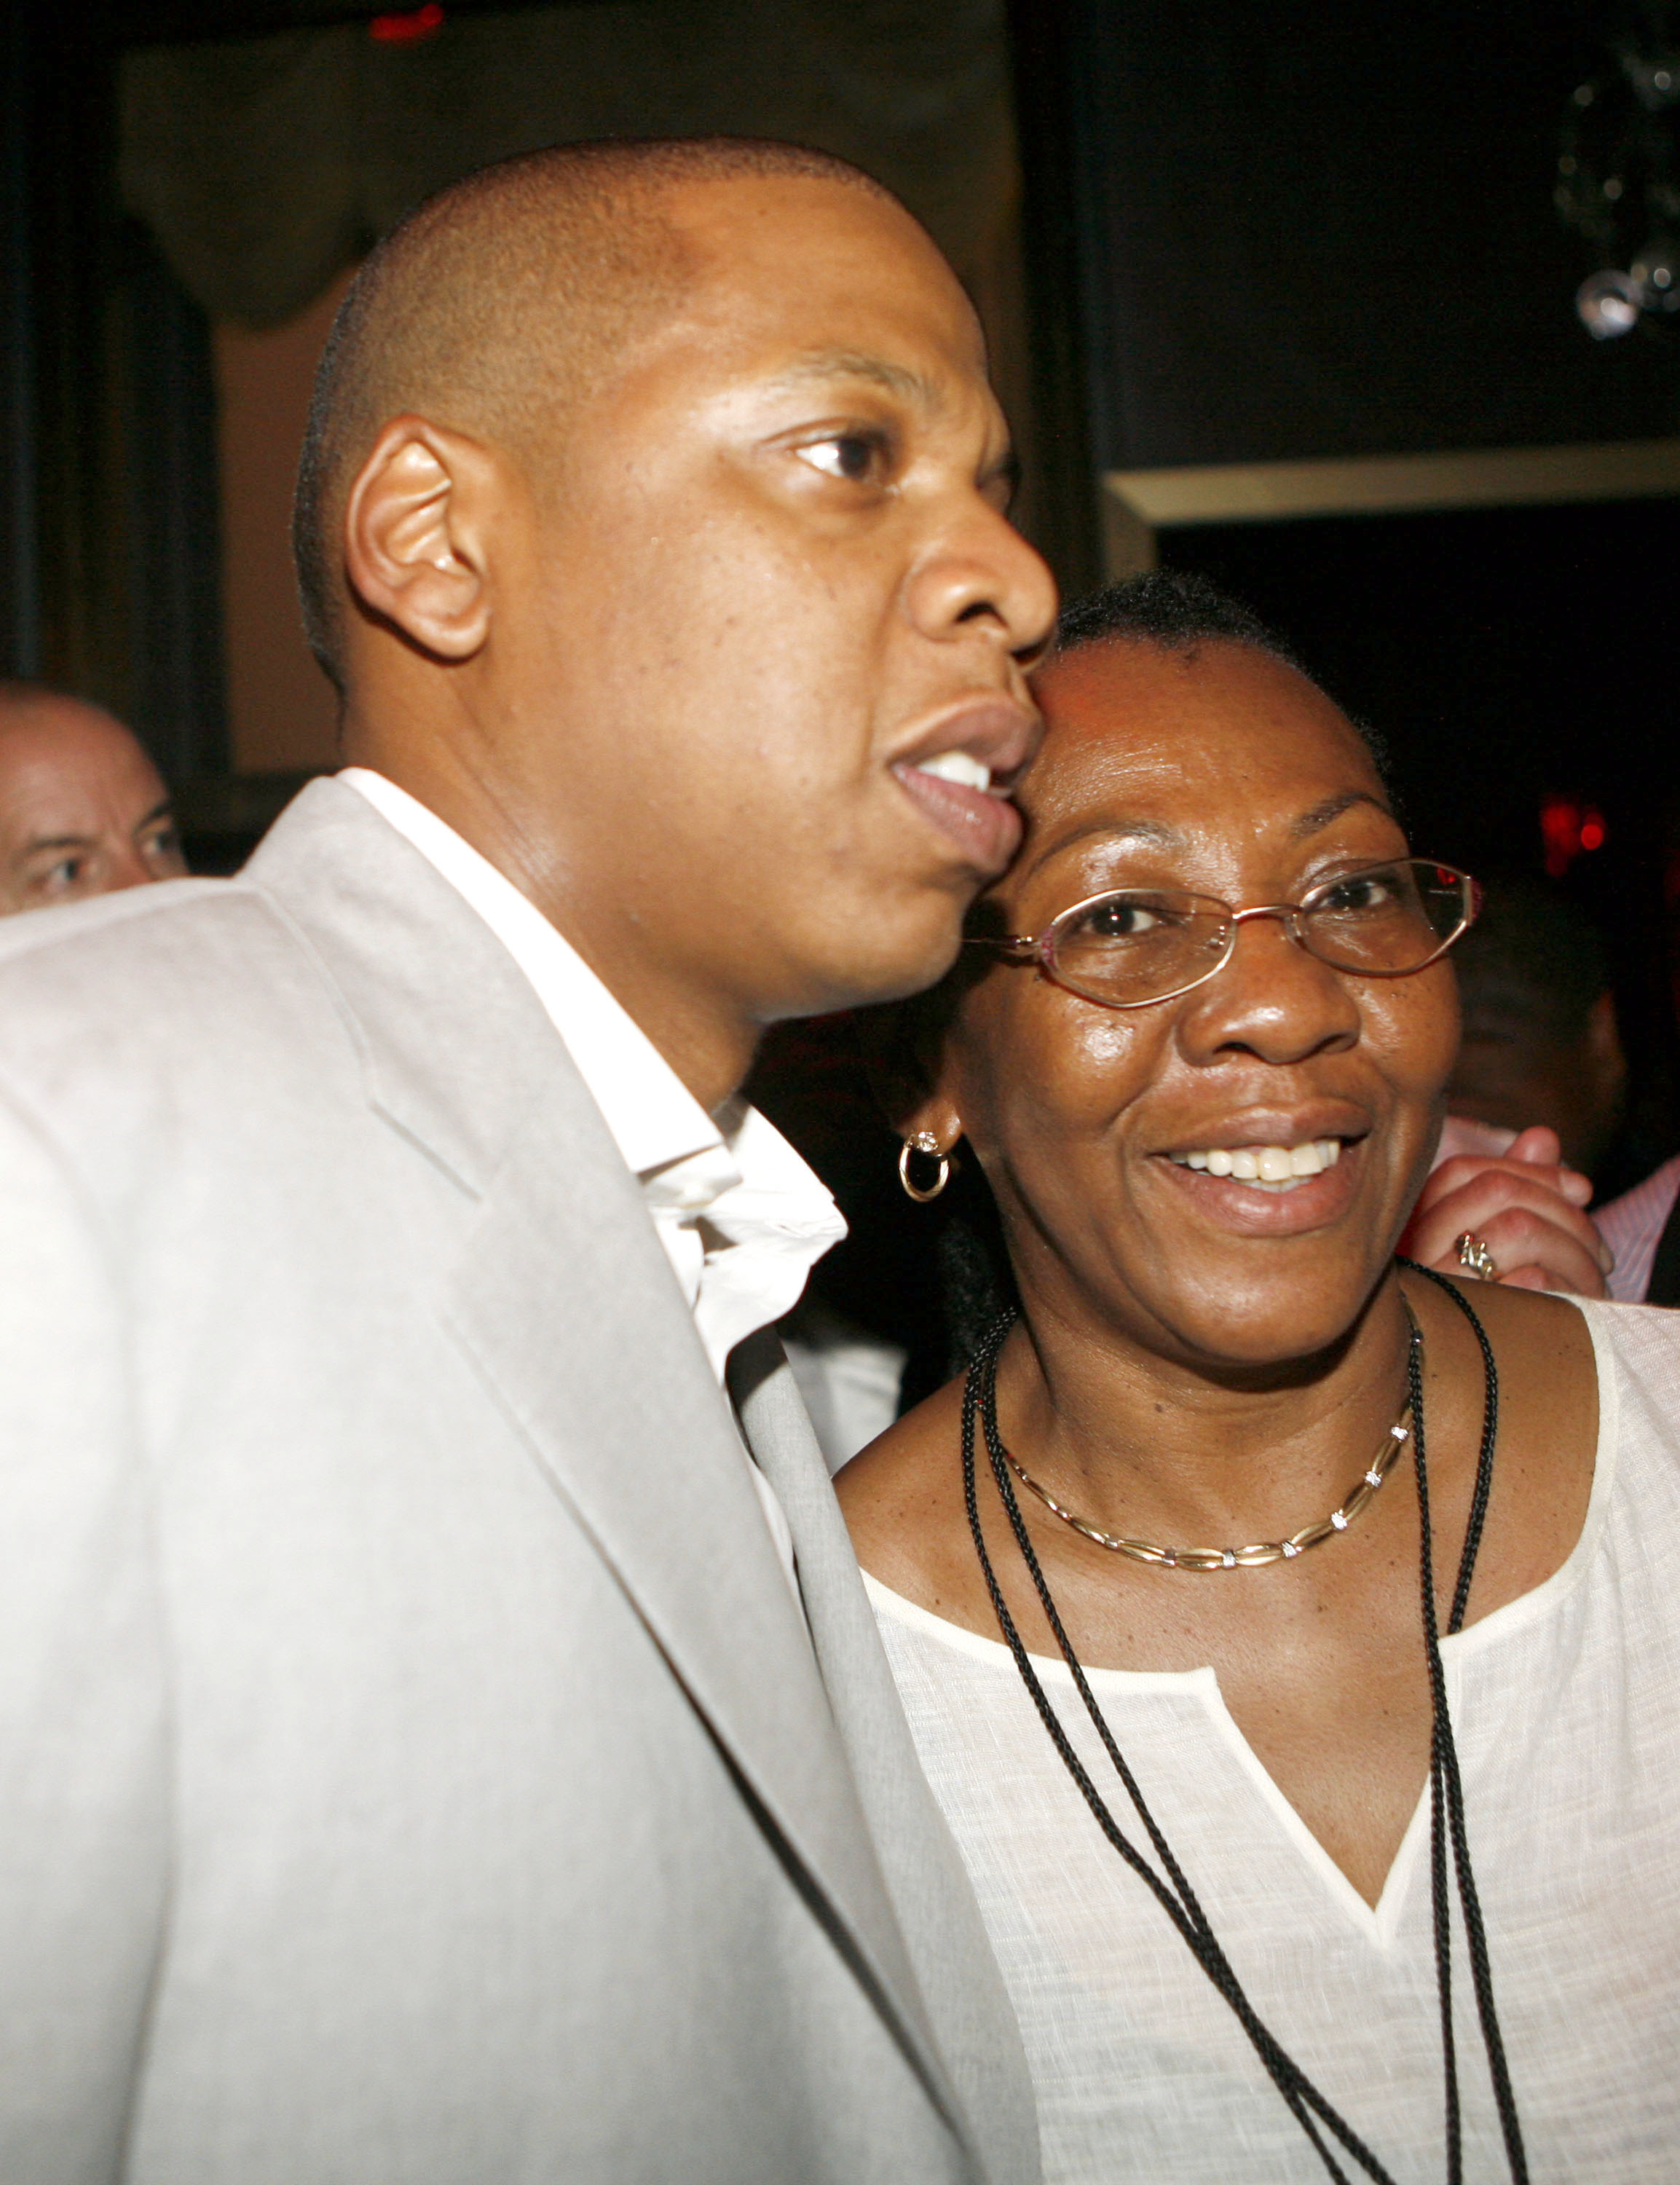 Jay Z and his mother Gloria Carter at Rainbow Room in New York, United States on June 25, 2006. | Source: Getty Images